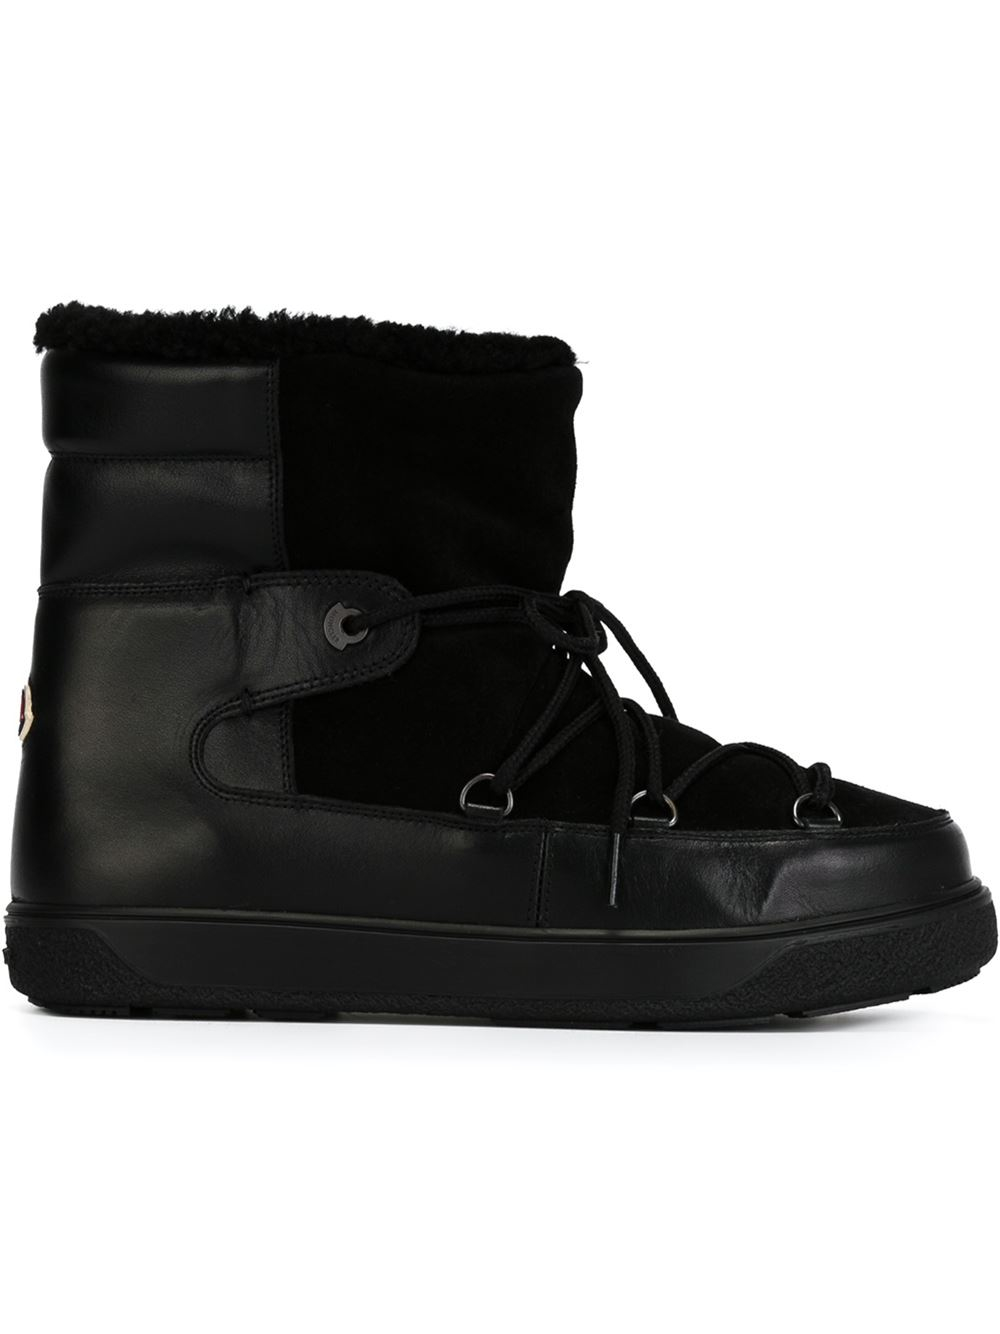 Moncler 'Fanny' Snow Boots in Black | Lyst